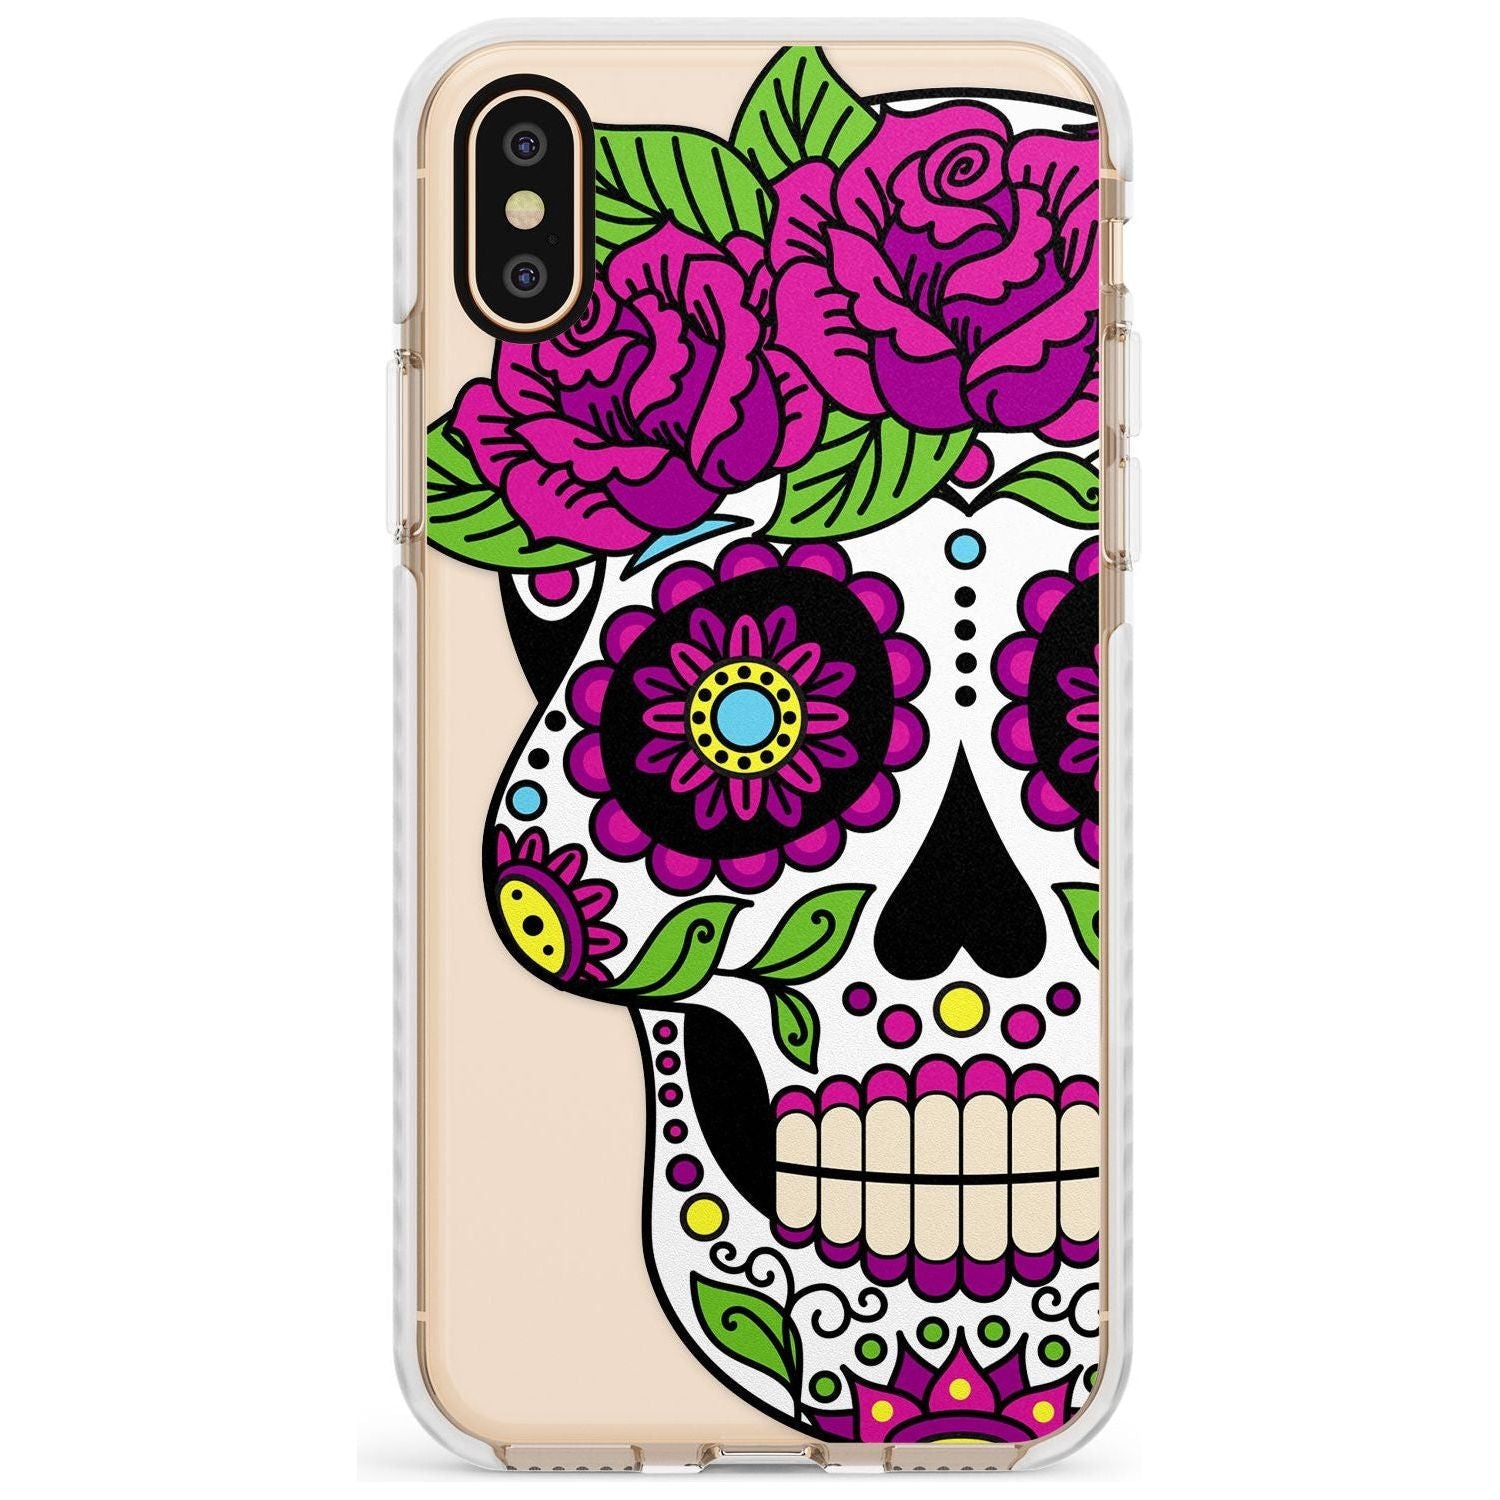 Purple Floral Sugar Skull Impact Phone Case for iPhone X XS Max XR